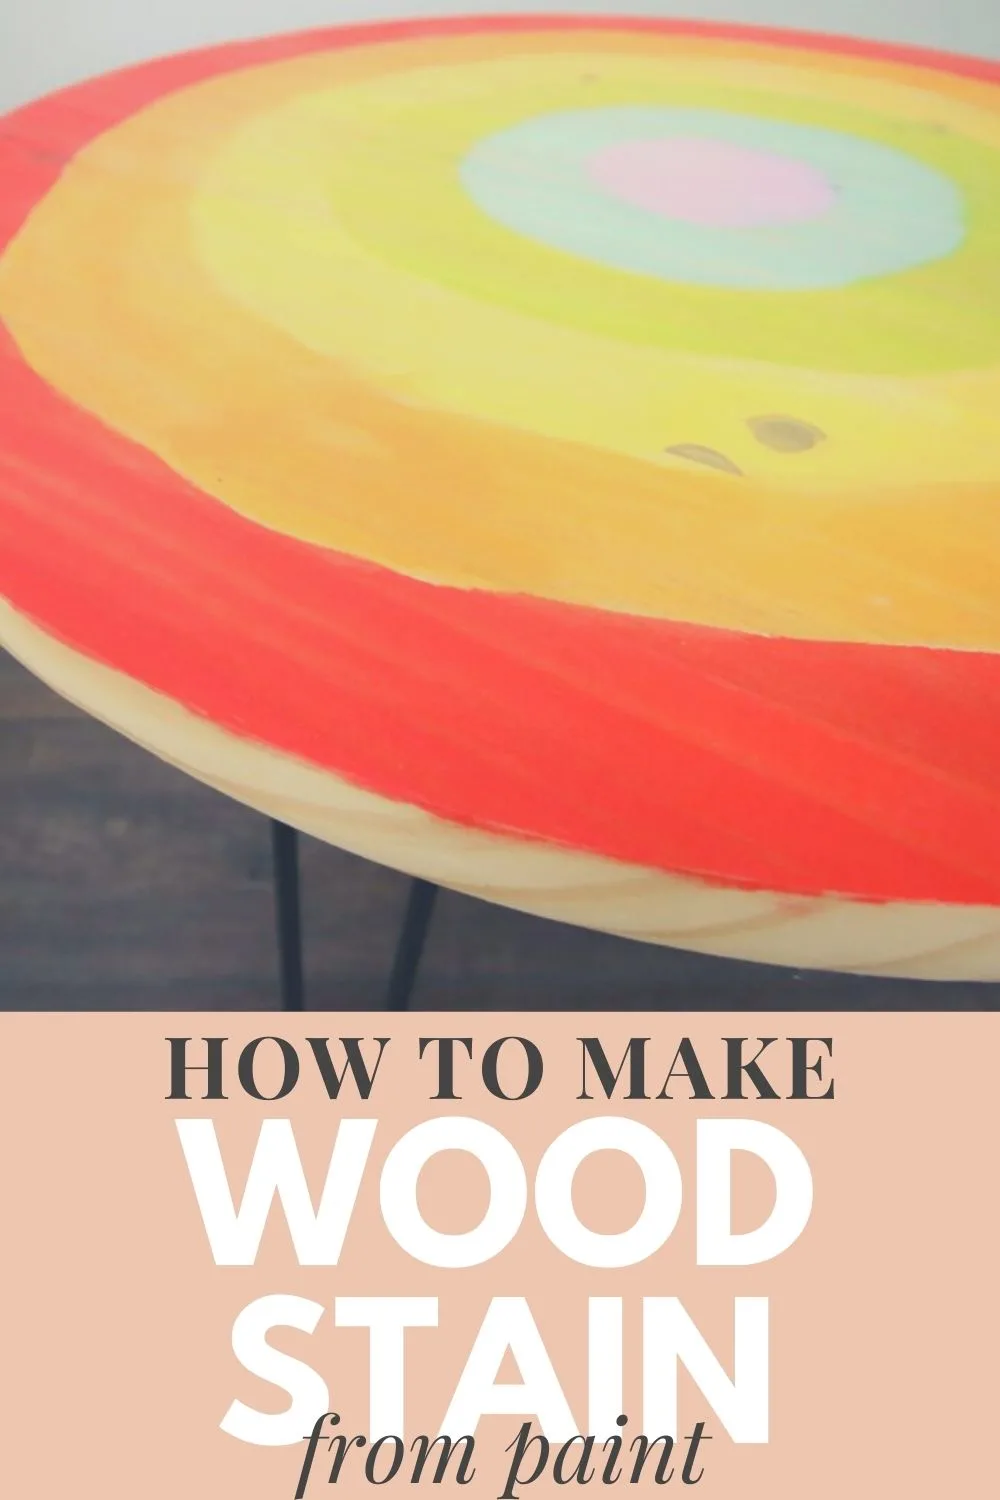 how to make wood stain from paint